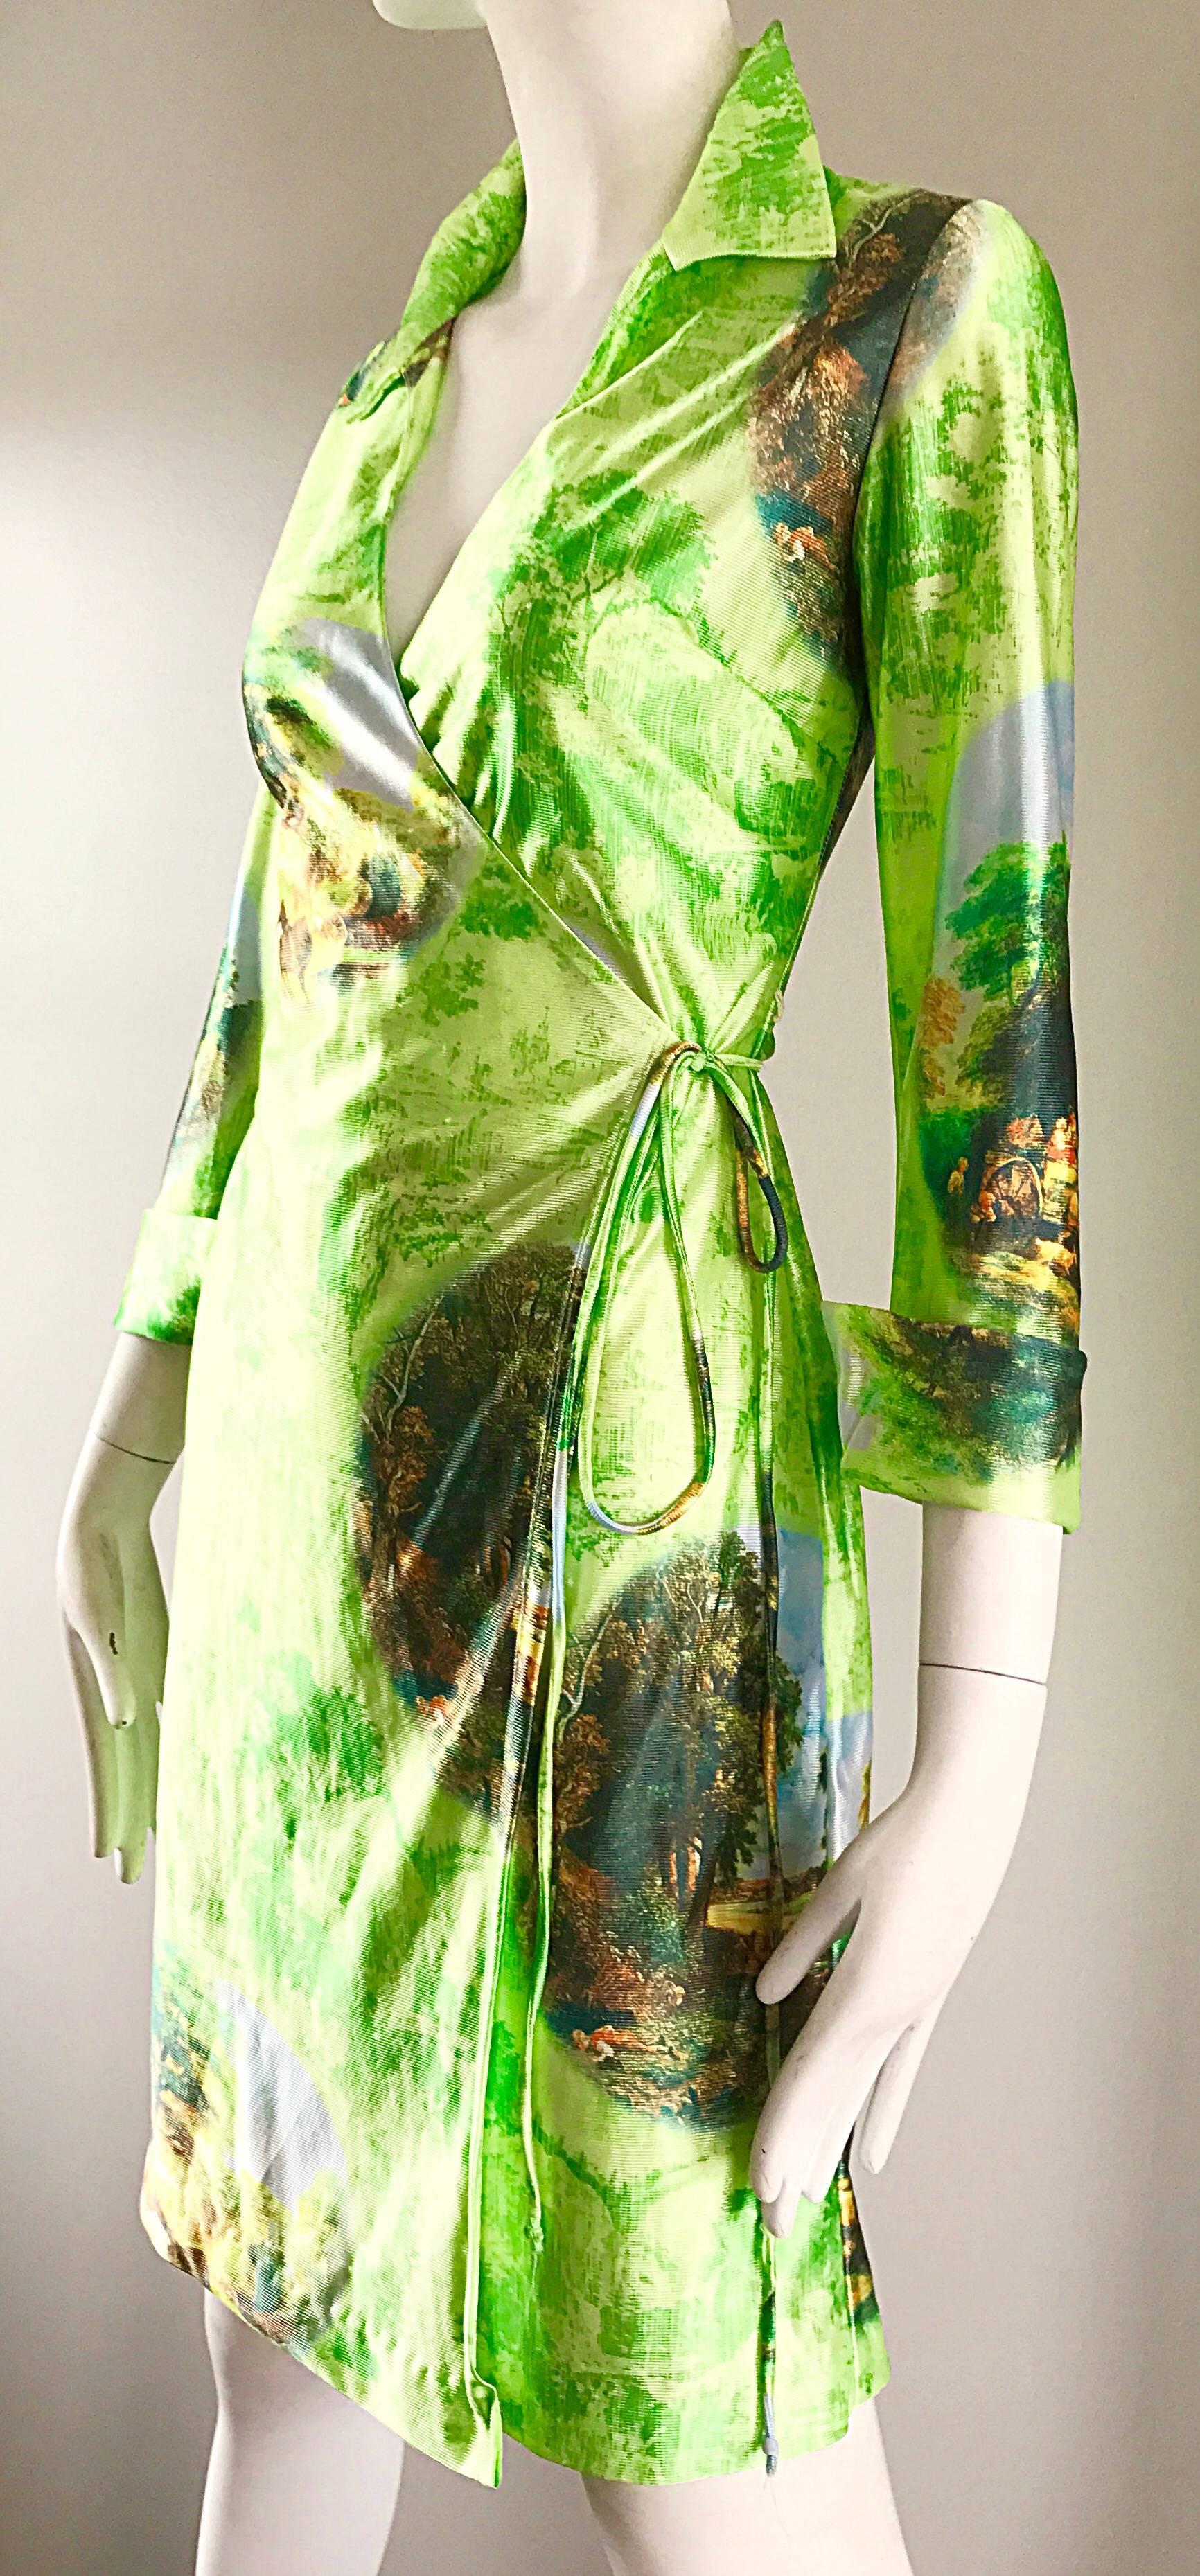 Fabulous 1990s Does 1970s Neon Green Novelty Horse Print Vintage 90s Wrap Dress In Excellent Condition For Sale In San Diego, CA